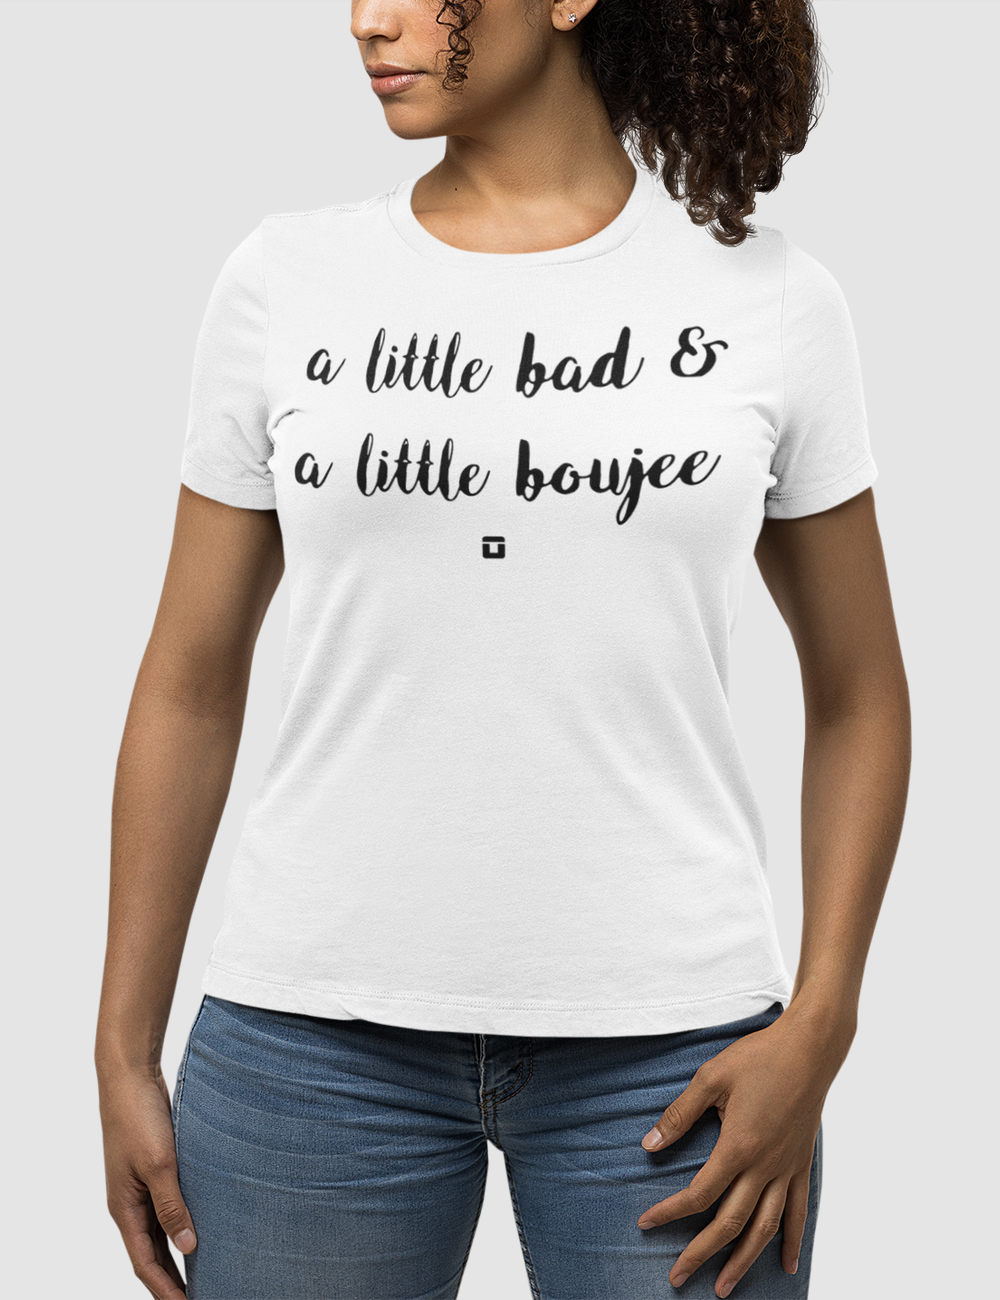 A Little Bad And A Little Boujee | Women's Fitted T-Shirt OniTakai